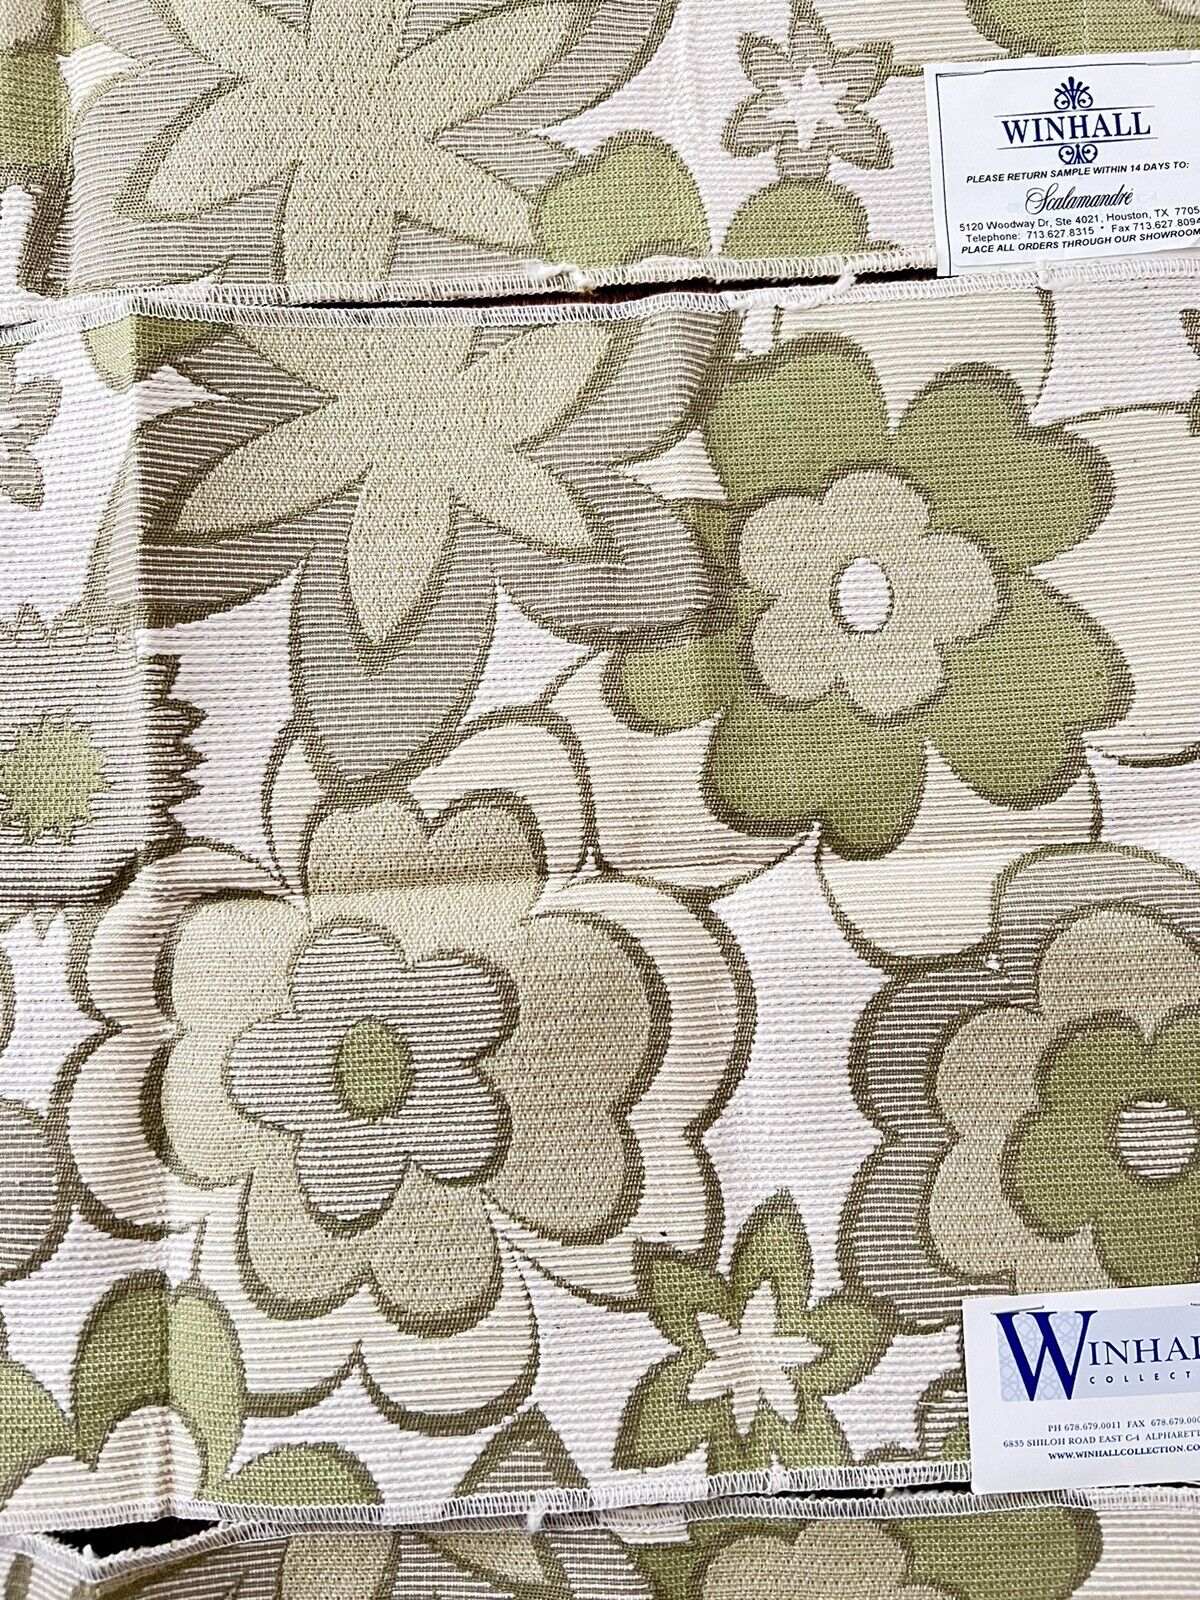 5 WINHALL Fabric Collection- Garden Party- - H 15” x  V 12 “- Color  Green